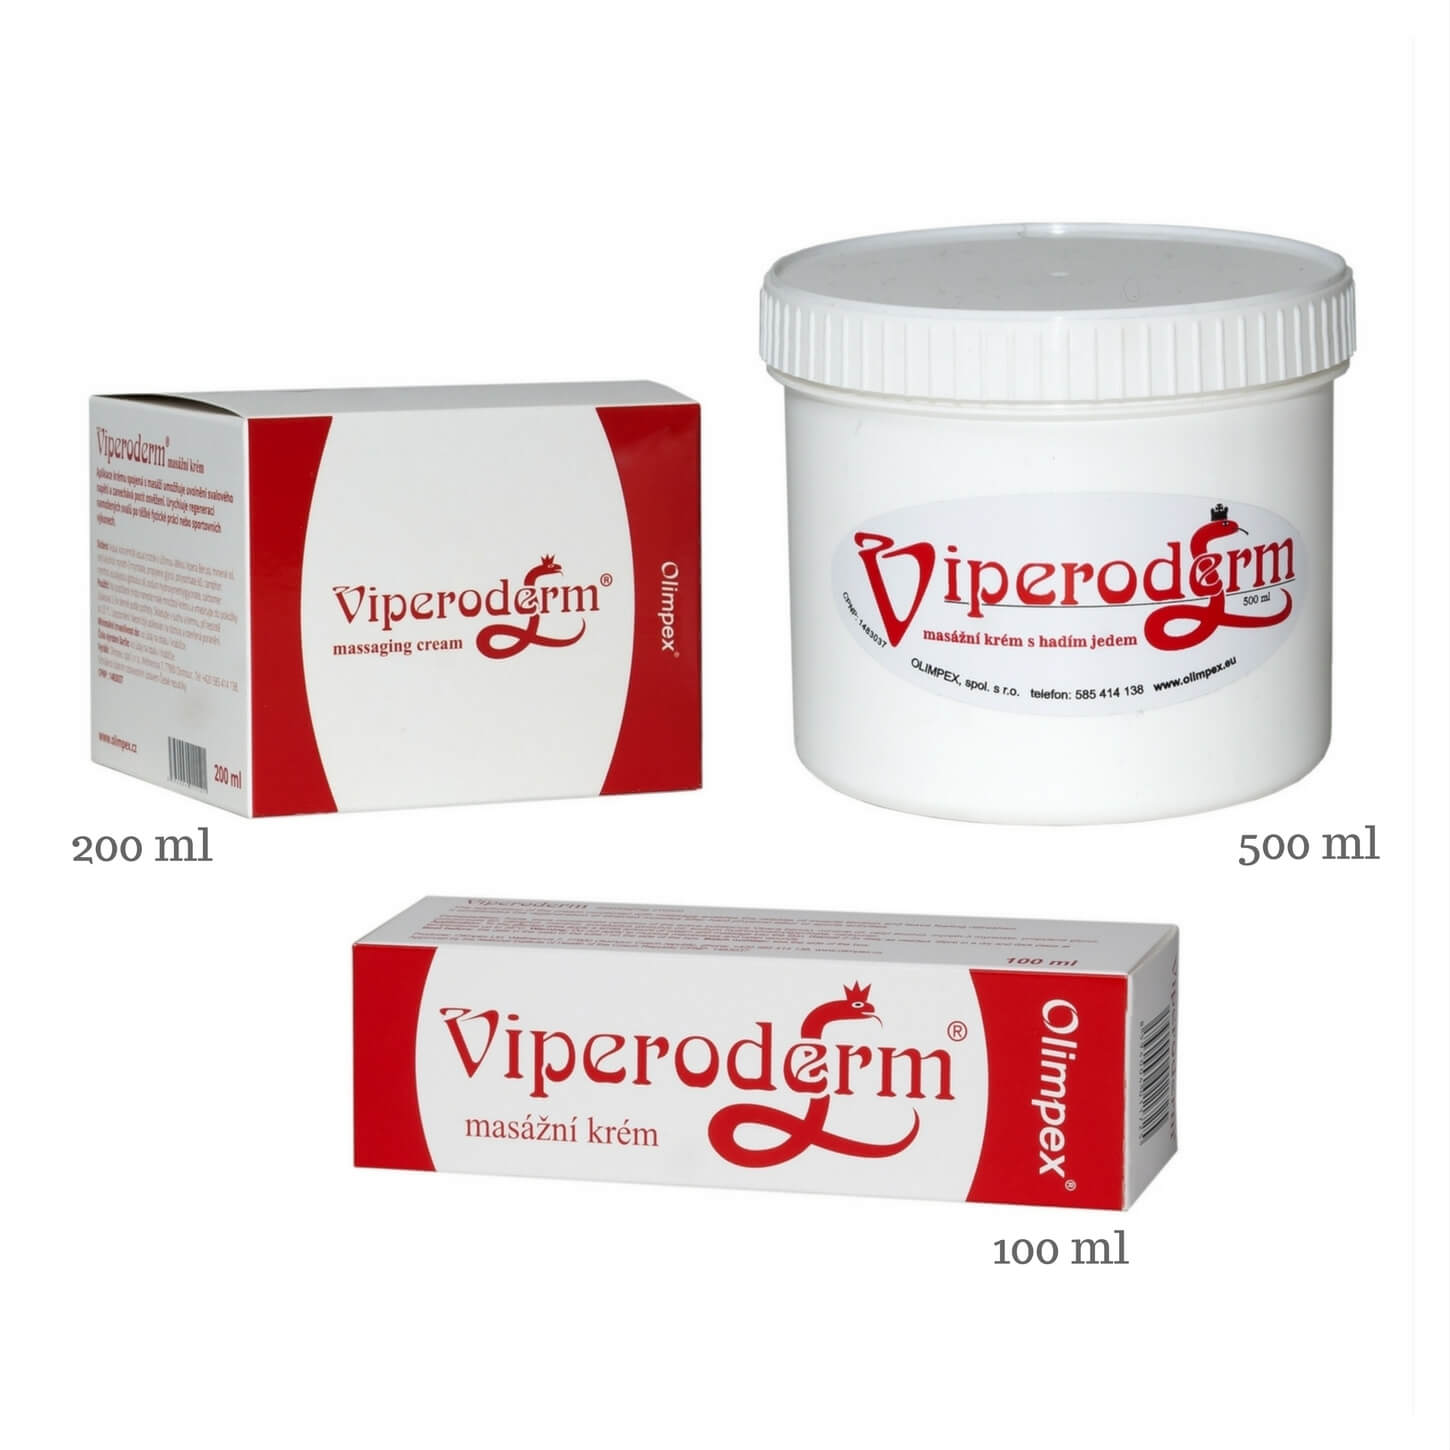 Olimpex s. r. o. Viperoderm 100 ml